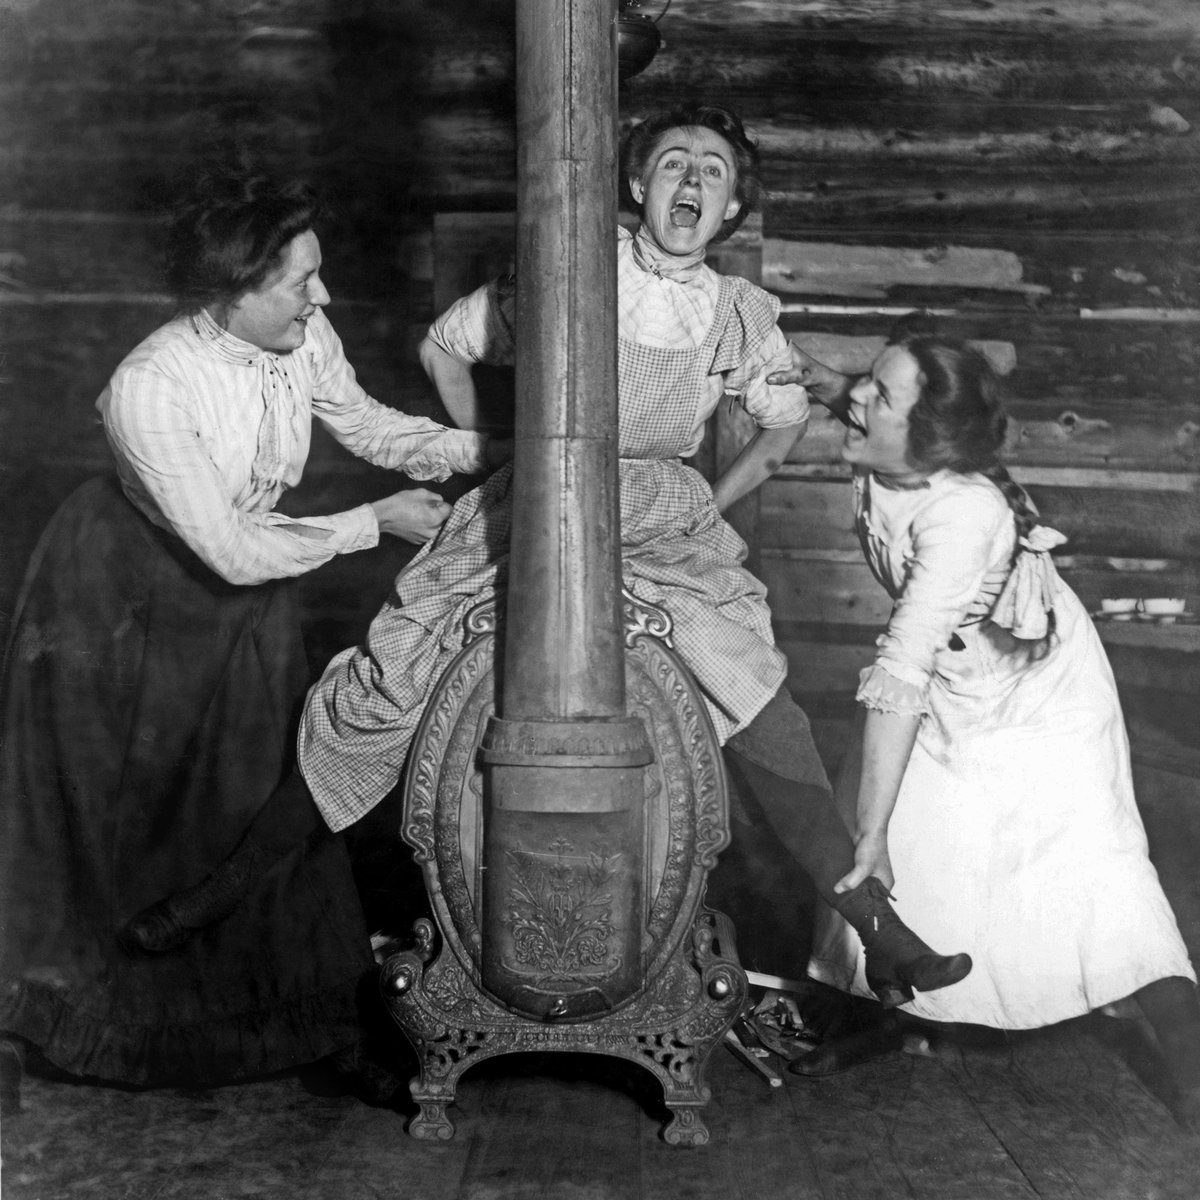 1902: Woman on a stove _ Photographer Mattie Gunterman at the Nettie L cookhouse near Ferguson, British Columbia with sisters Annie and Rose Williams _ For more pictures like this, follow @Retronaut